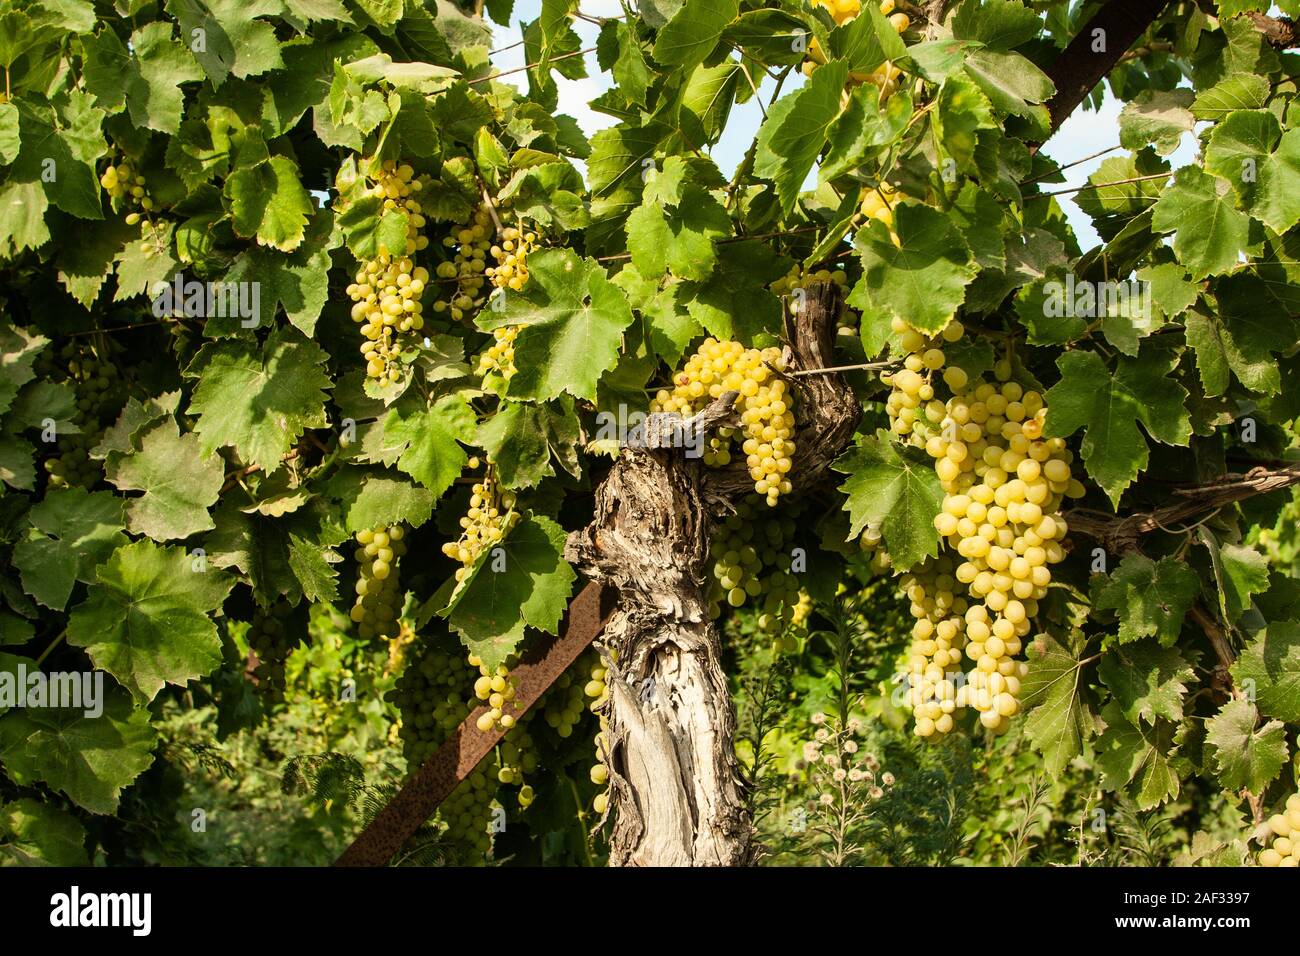 A large cluster of green grapes growing in a bunch on vine. Photographed in Israel Stock Photo